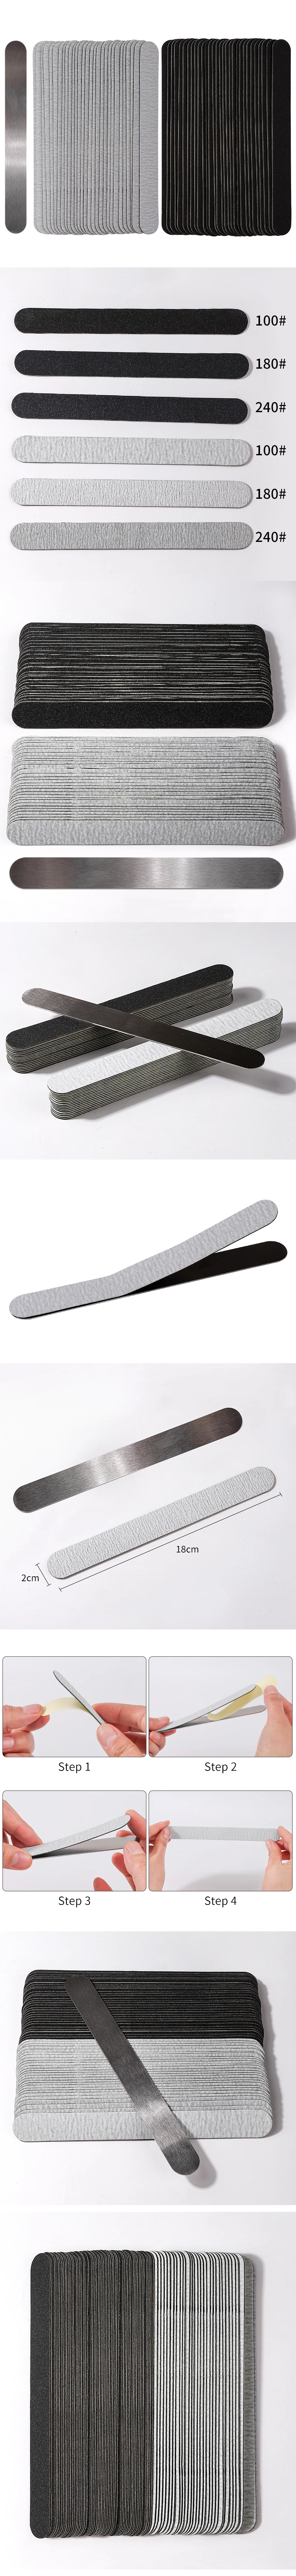 Nail File Replacement Set - 100/180 Grit